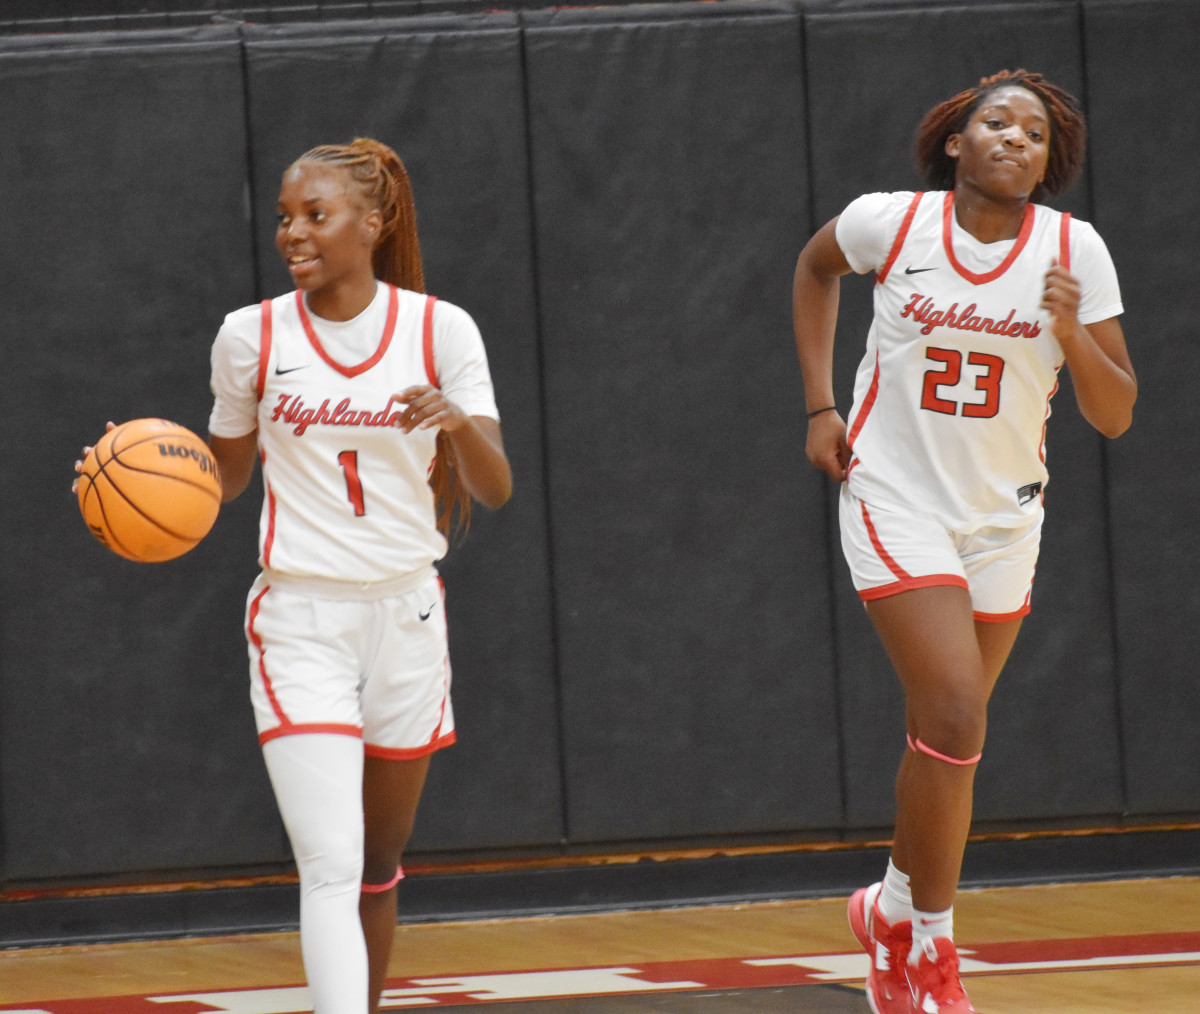 Lake Highland Prep guard Eleecia Carter (1) brings the ball up court alongside teammate Saleigh Simpson (23) during Thursday night's Class 4A, Region 2 quarterfinal game against North Marion.